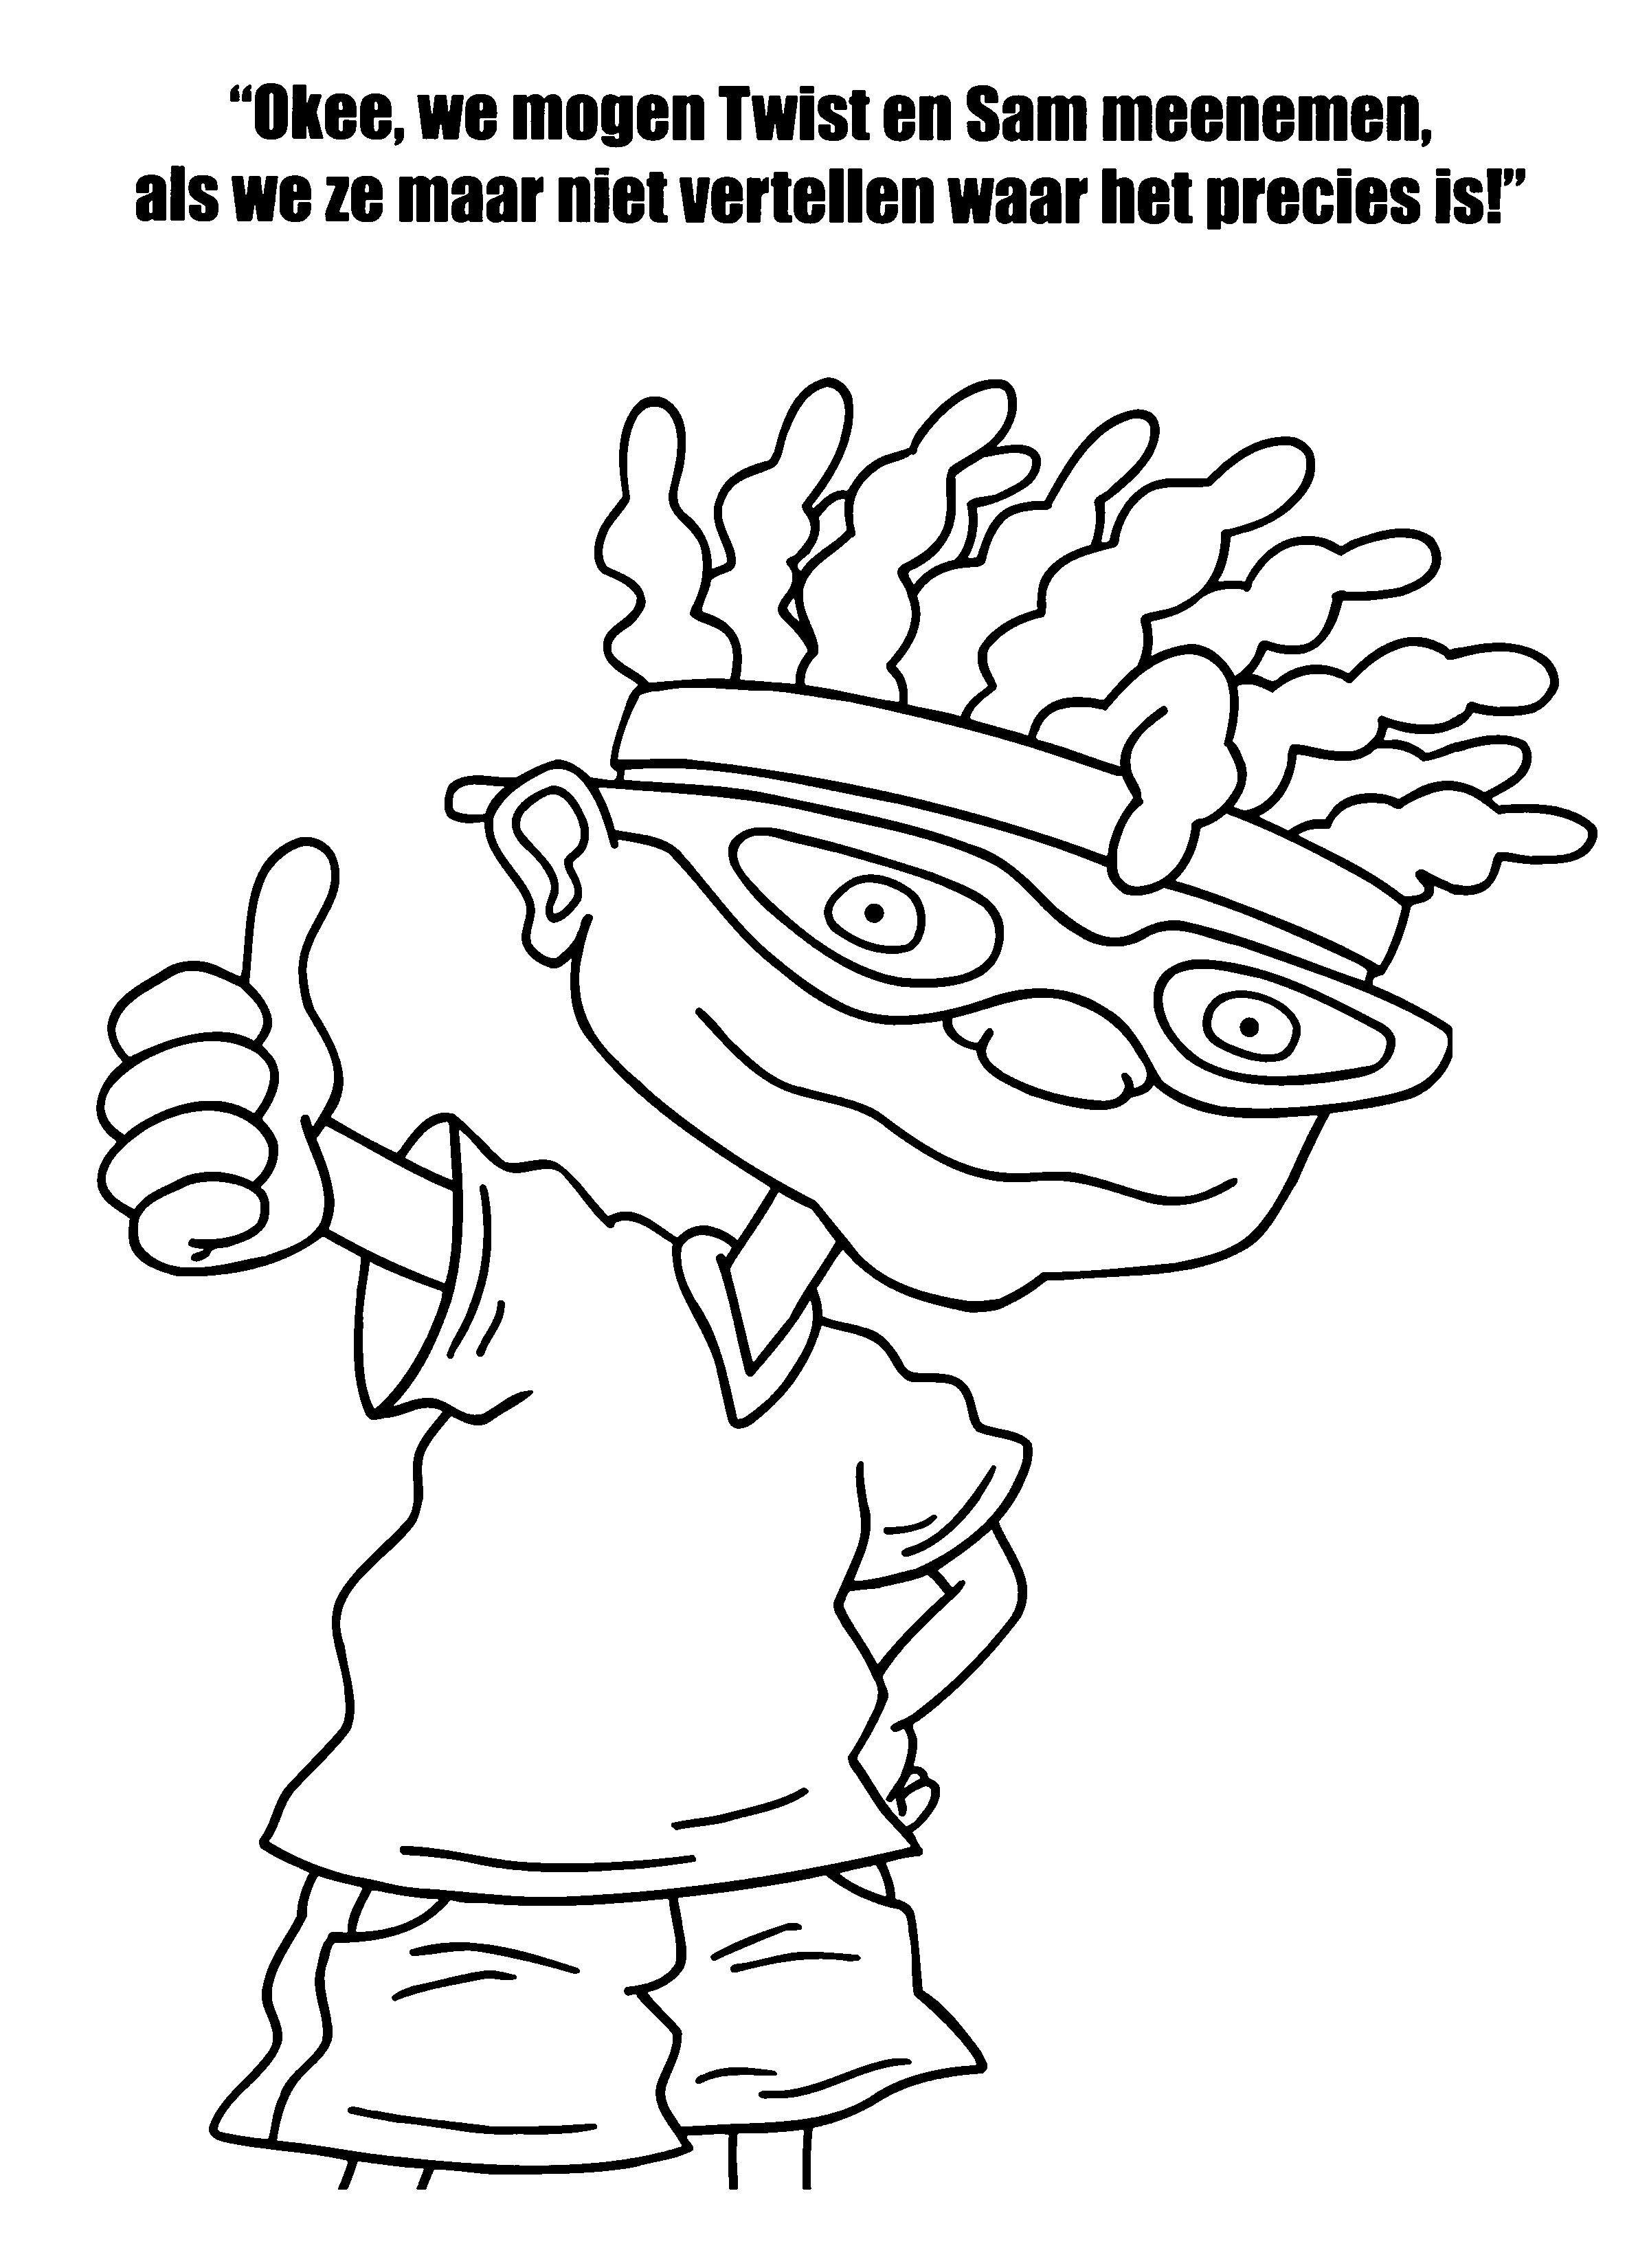 Rocket power coloring pages